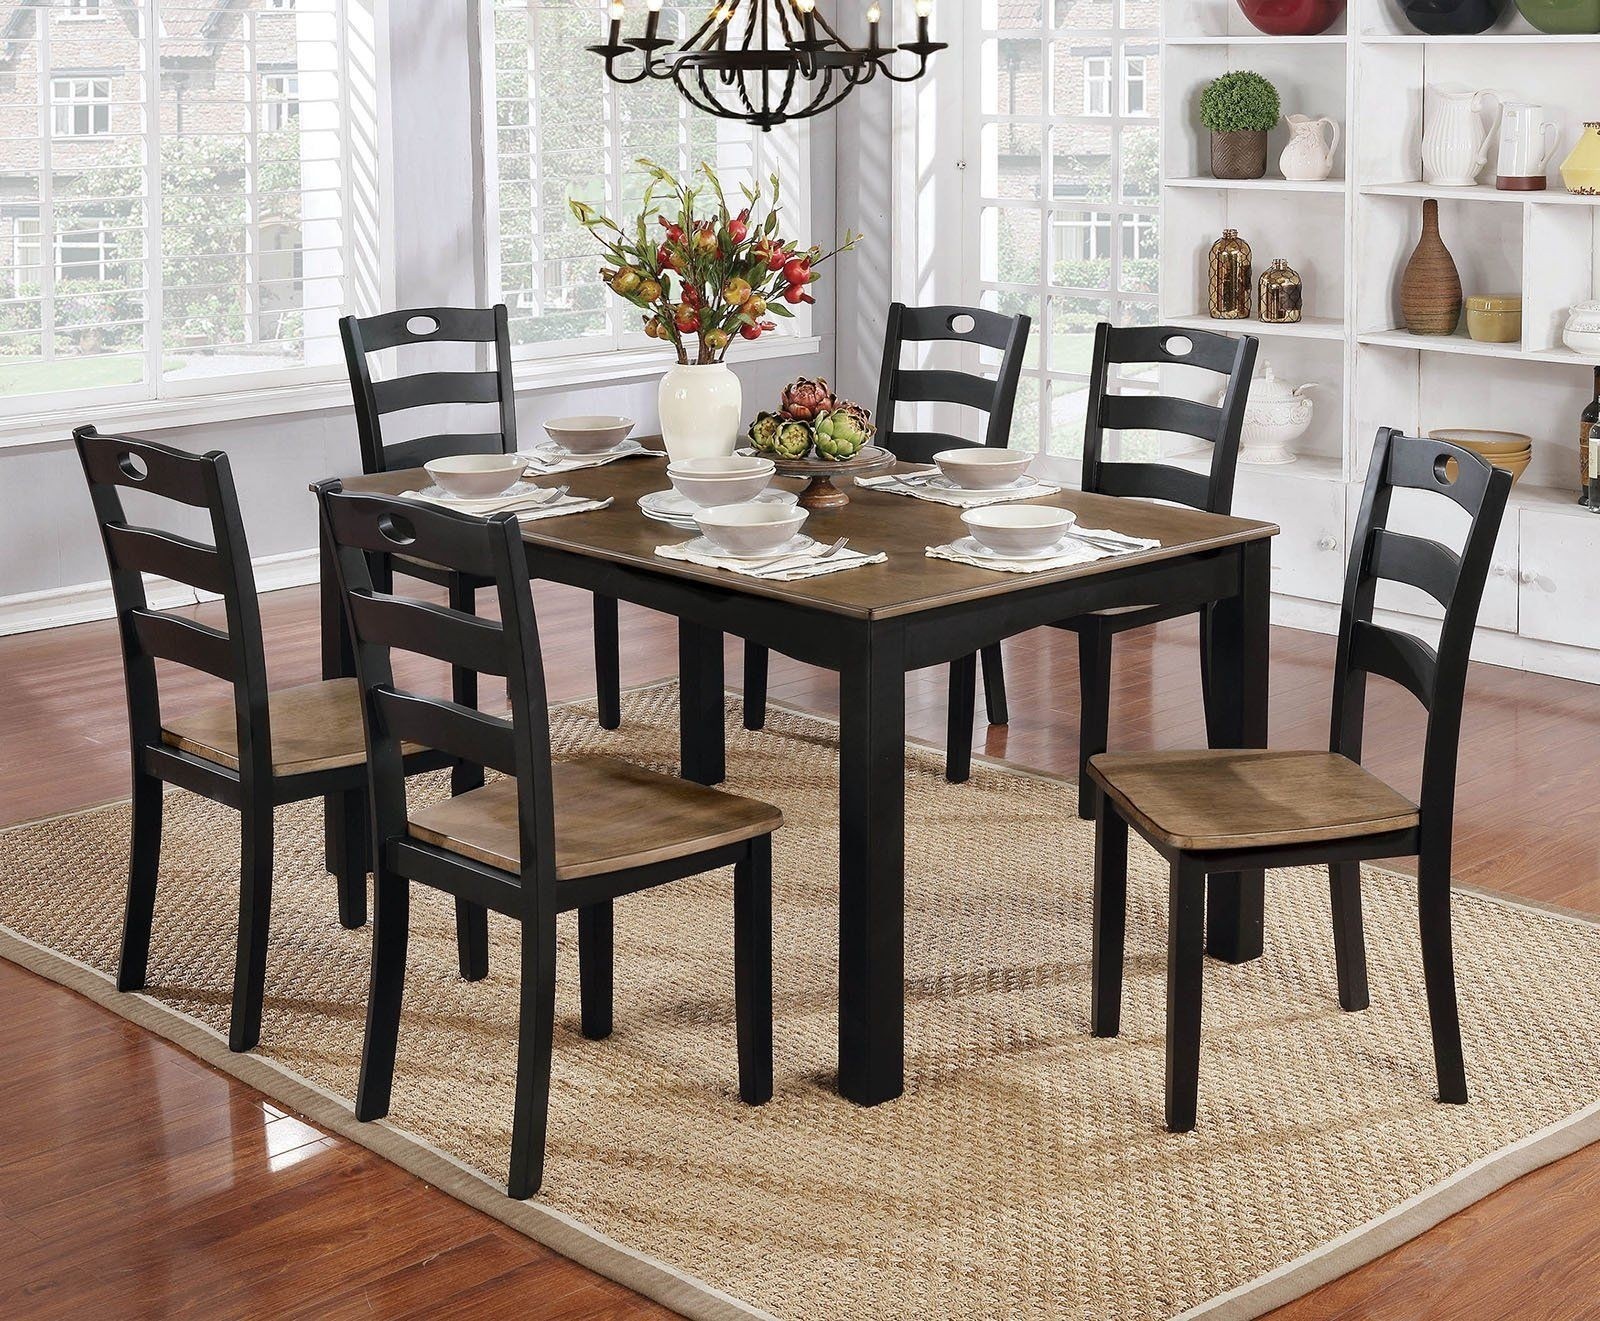 7 piece wooden dining table set in black and light